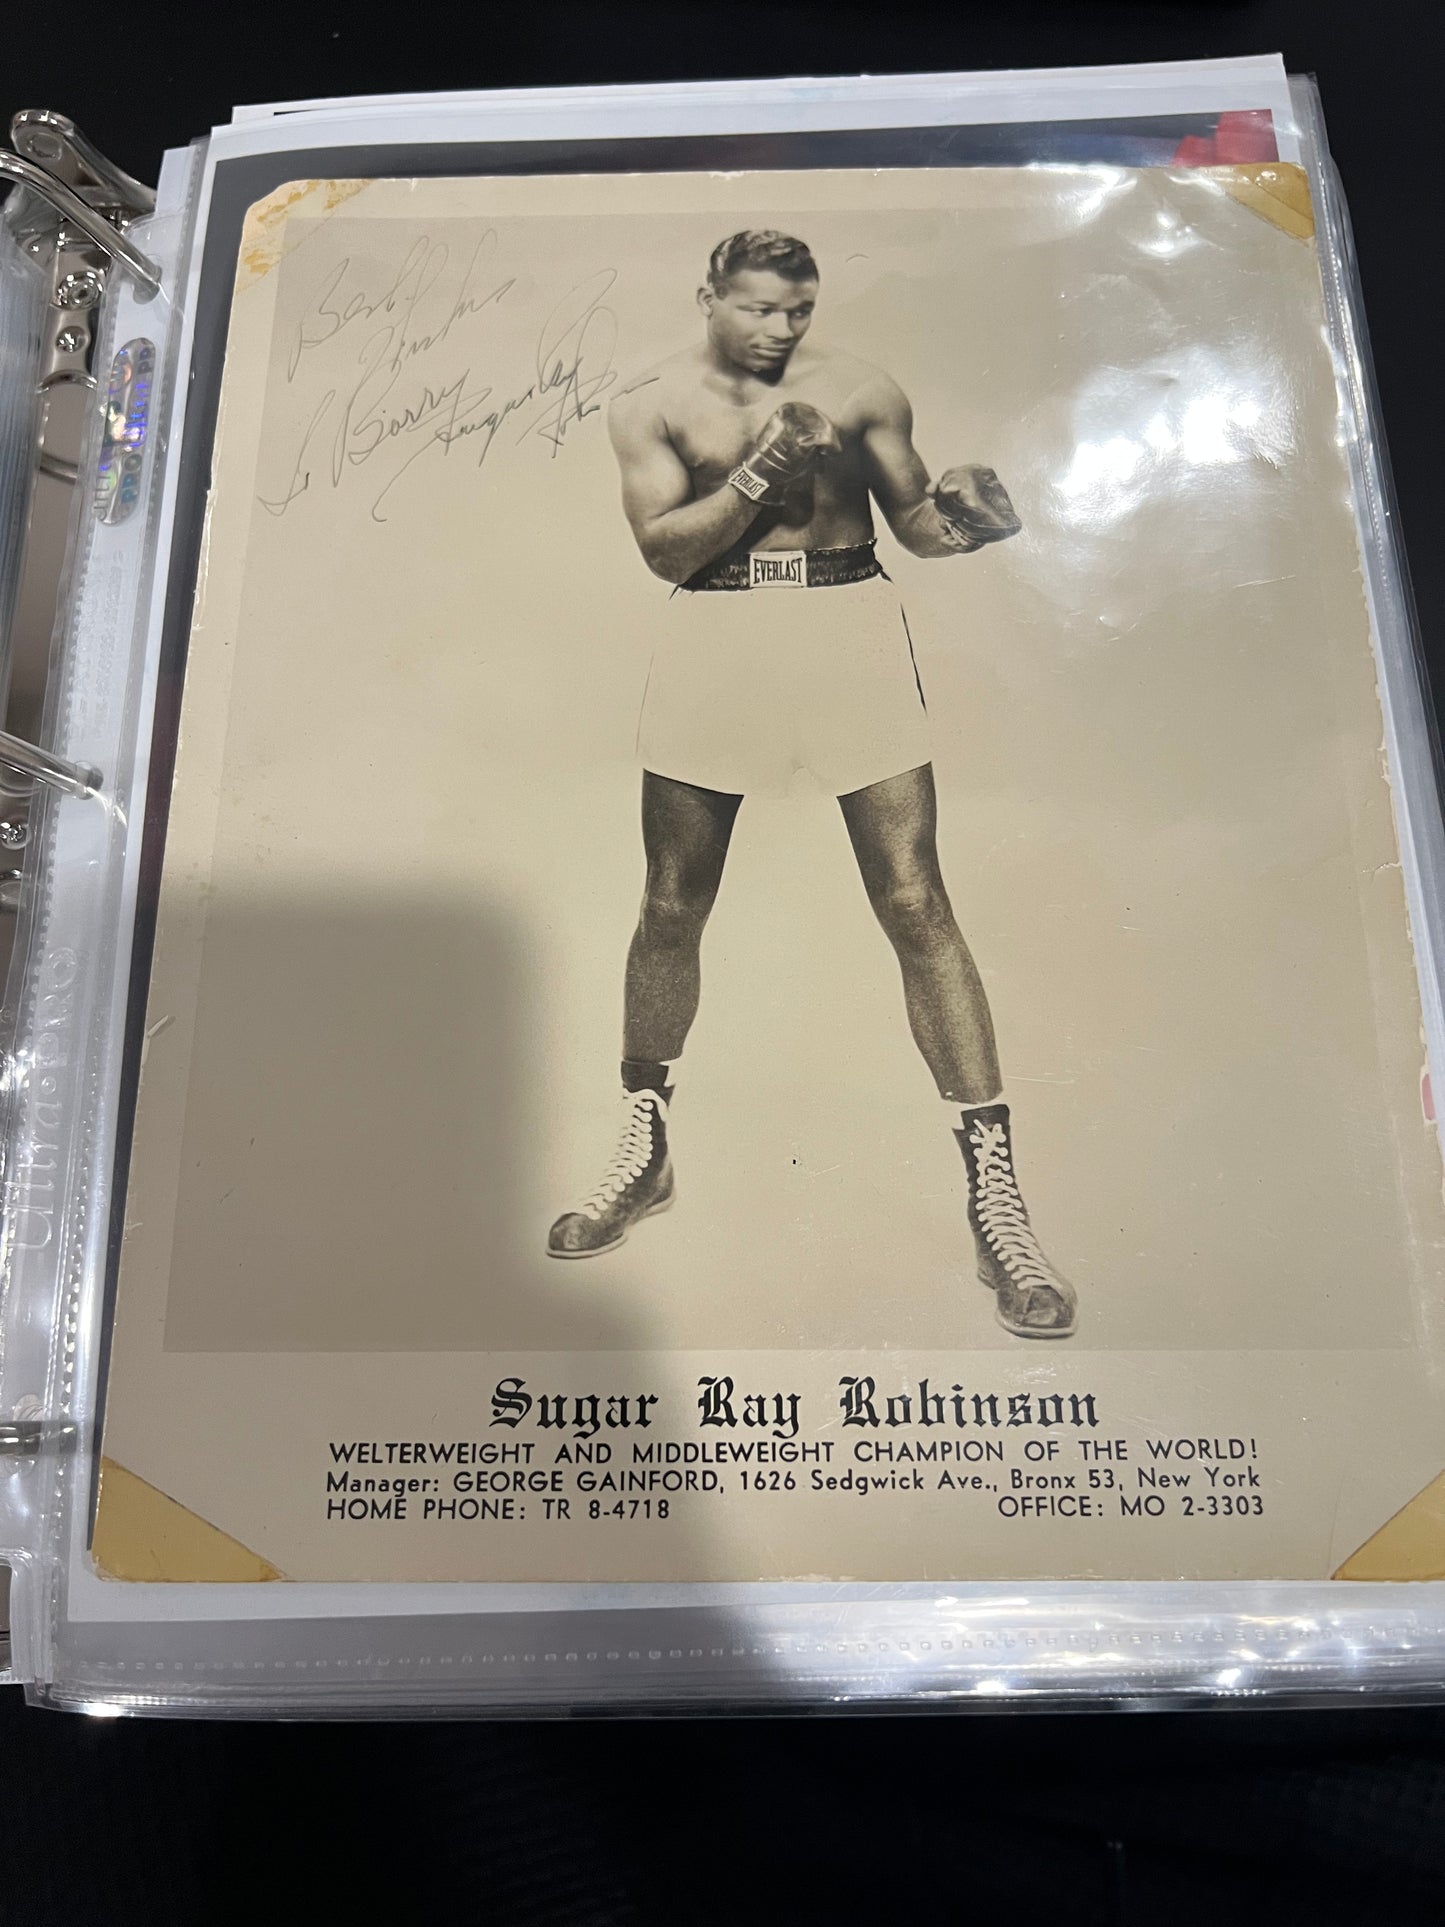 Sugar Ray Robinson hand signed early promotional photo (JSA PSA BECKETT Guarantee or full refund for life)